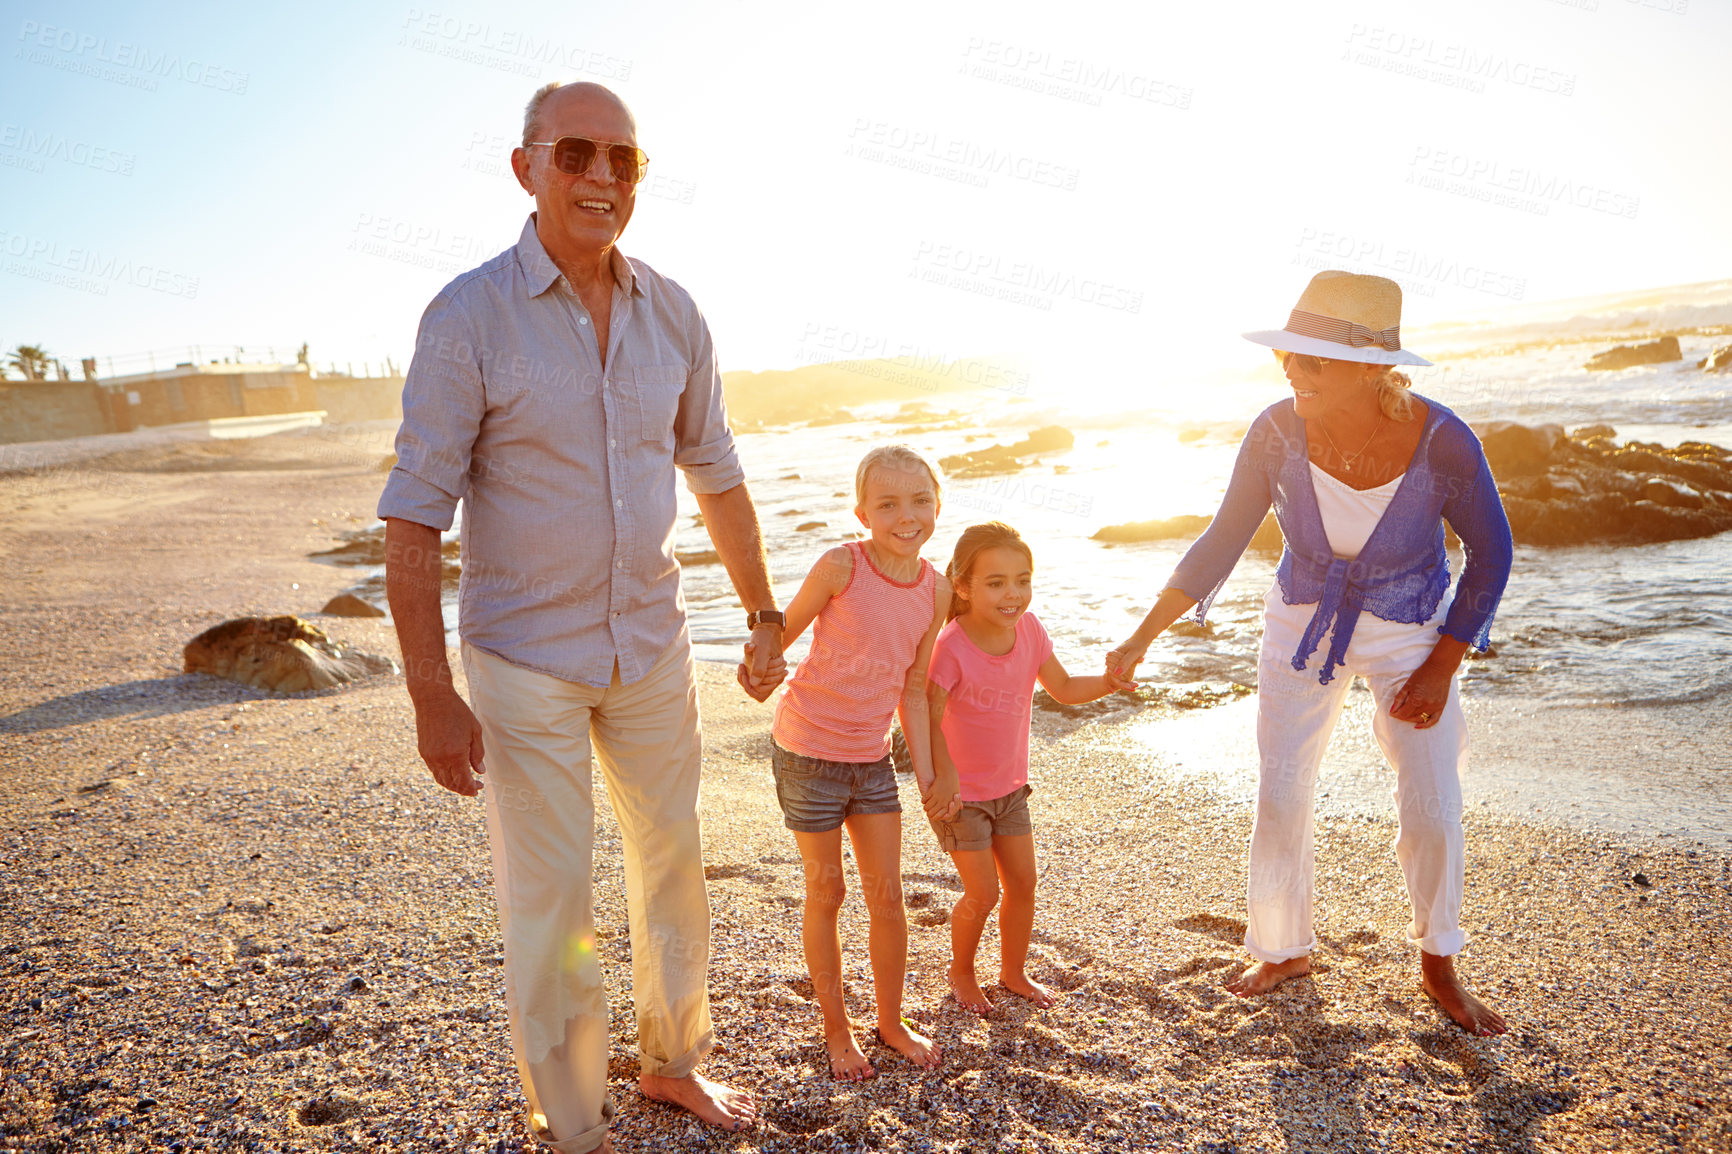 Buy stock photo Shot of a grandparents enjoying a day at the beach with their granddaughters